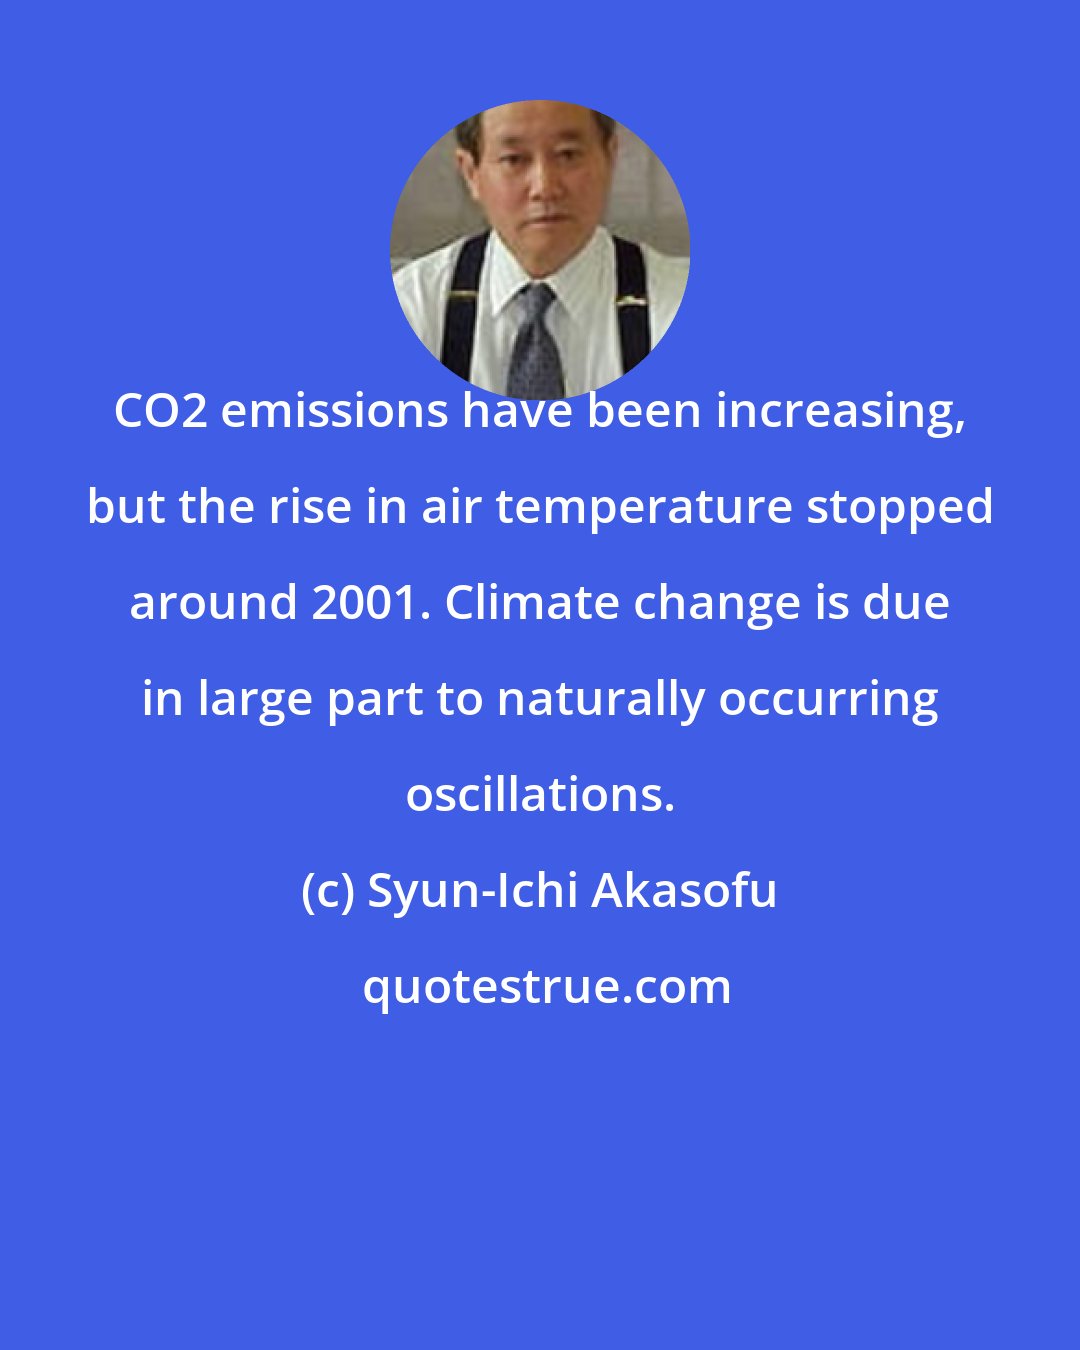 Syun-Ichi Akasofu: CO2 emissions have been increasing, but the rise in air temperature stopped around 2001. Climate change is due in large part to naturally occurring oscillations.